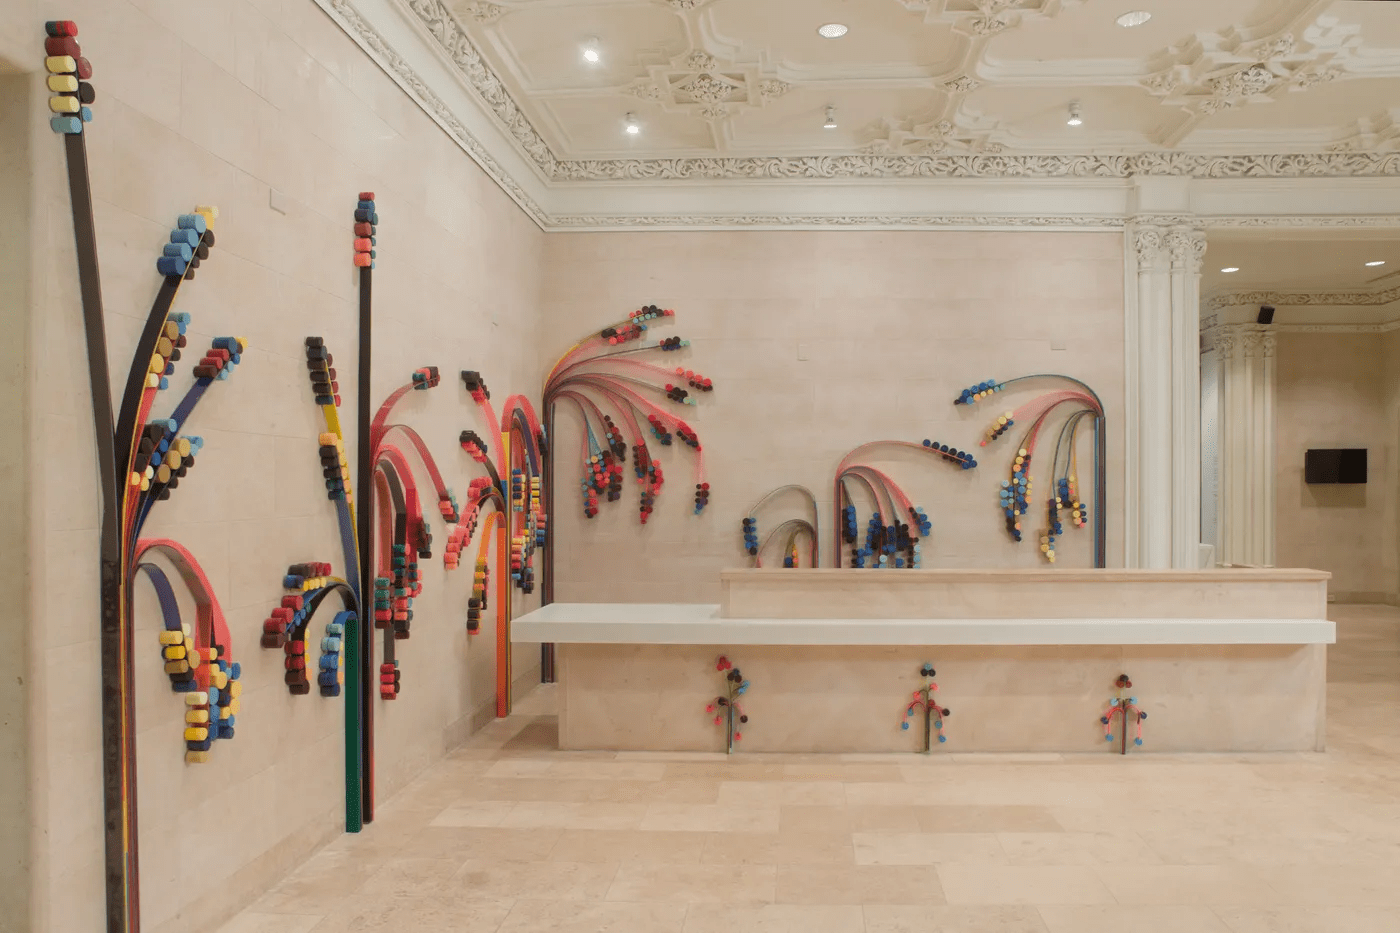 Art gallery installation of multi-colored materials that look similar to geometric trees